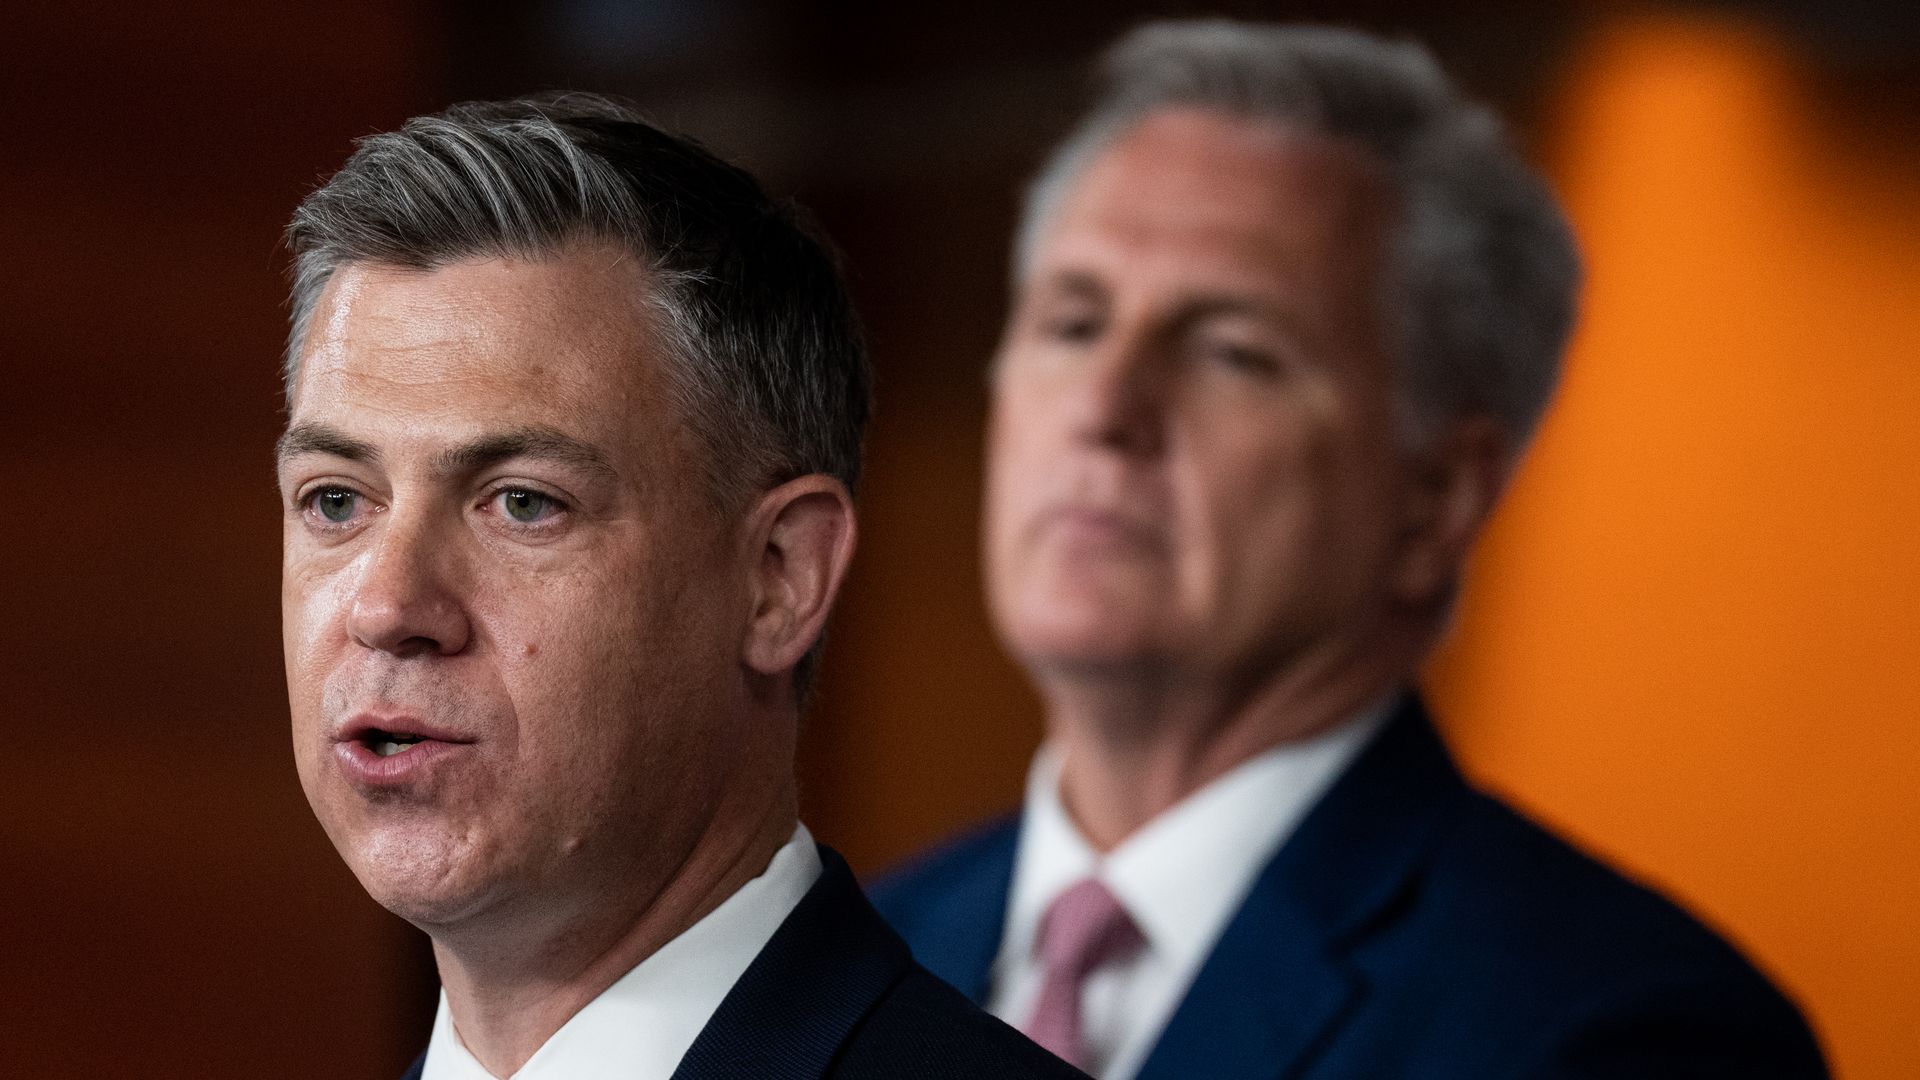 Rep. Jim Banks (R-Ind.) speaks with Minority Leader Kevin McCarthy out of focus in the background.